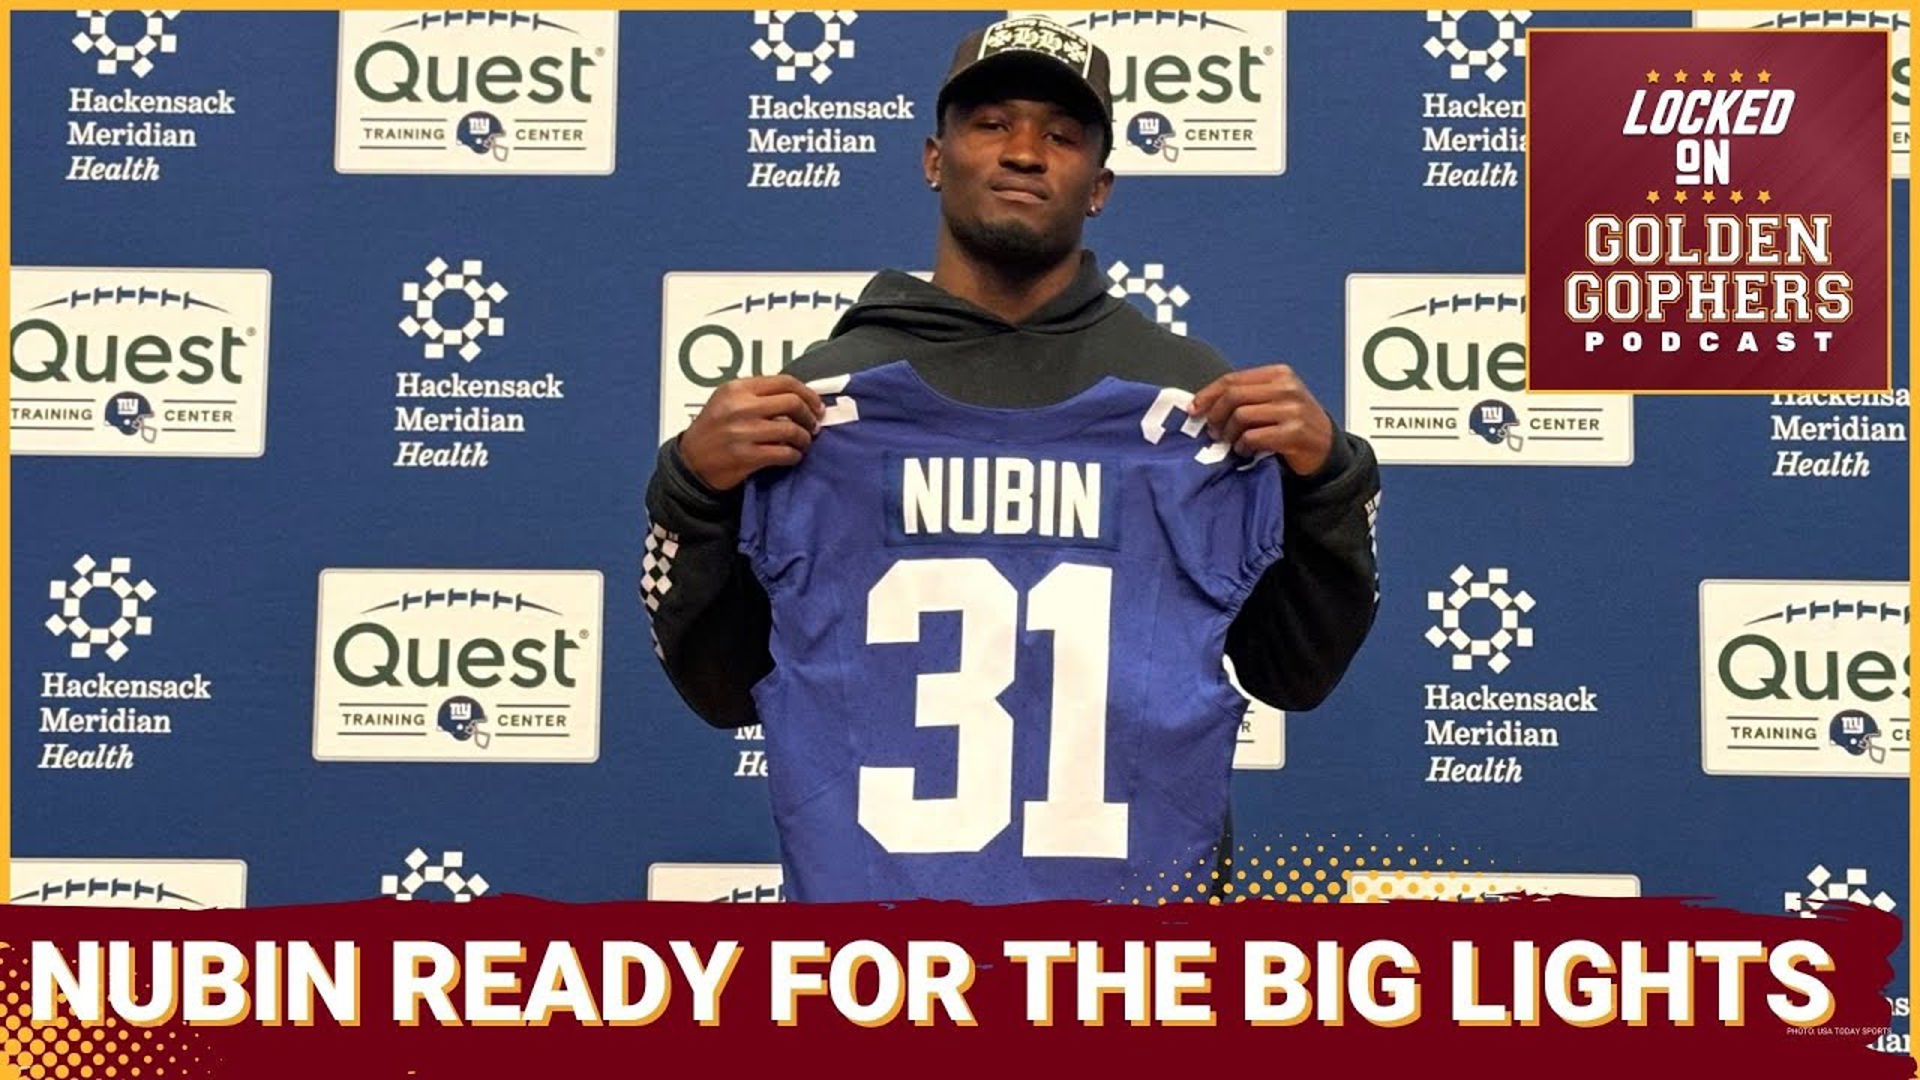 On today's Locked On Golden Gophers, host Kane Rob, iscusses what the New York Giants are getting in Minnesota Gophers Safety Tyler Nubin.